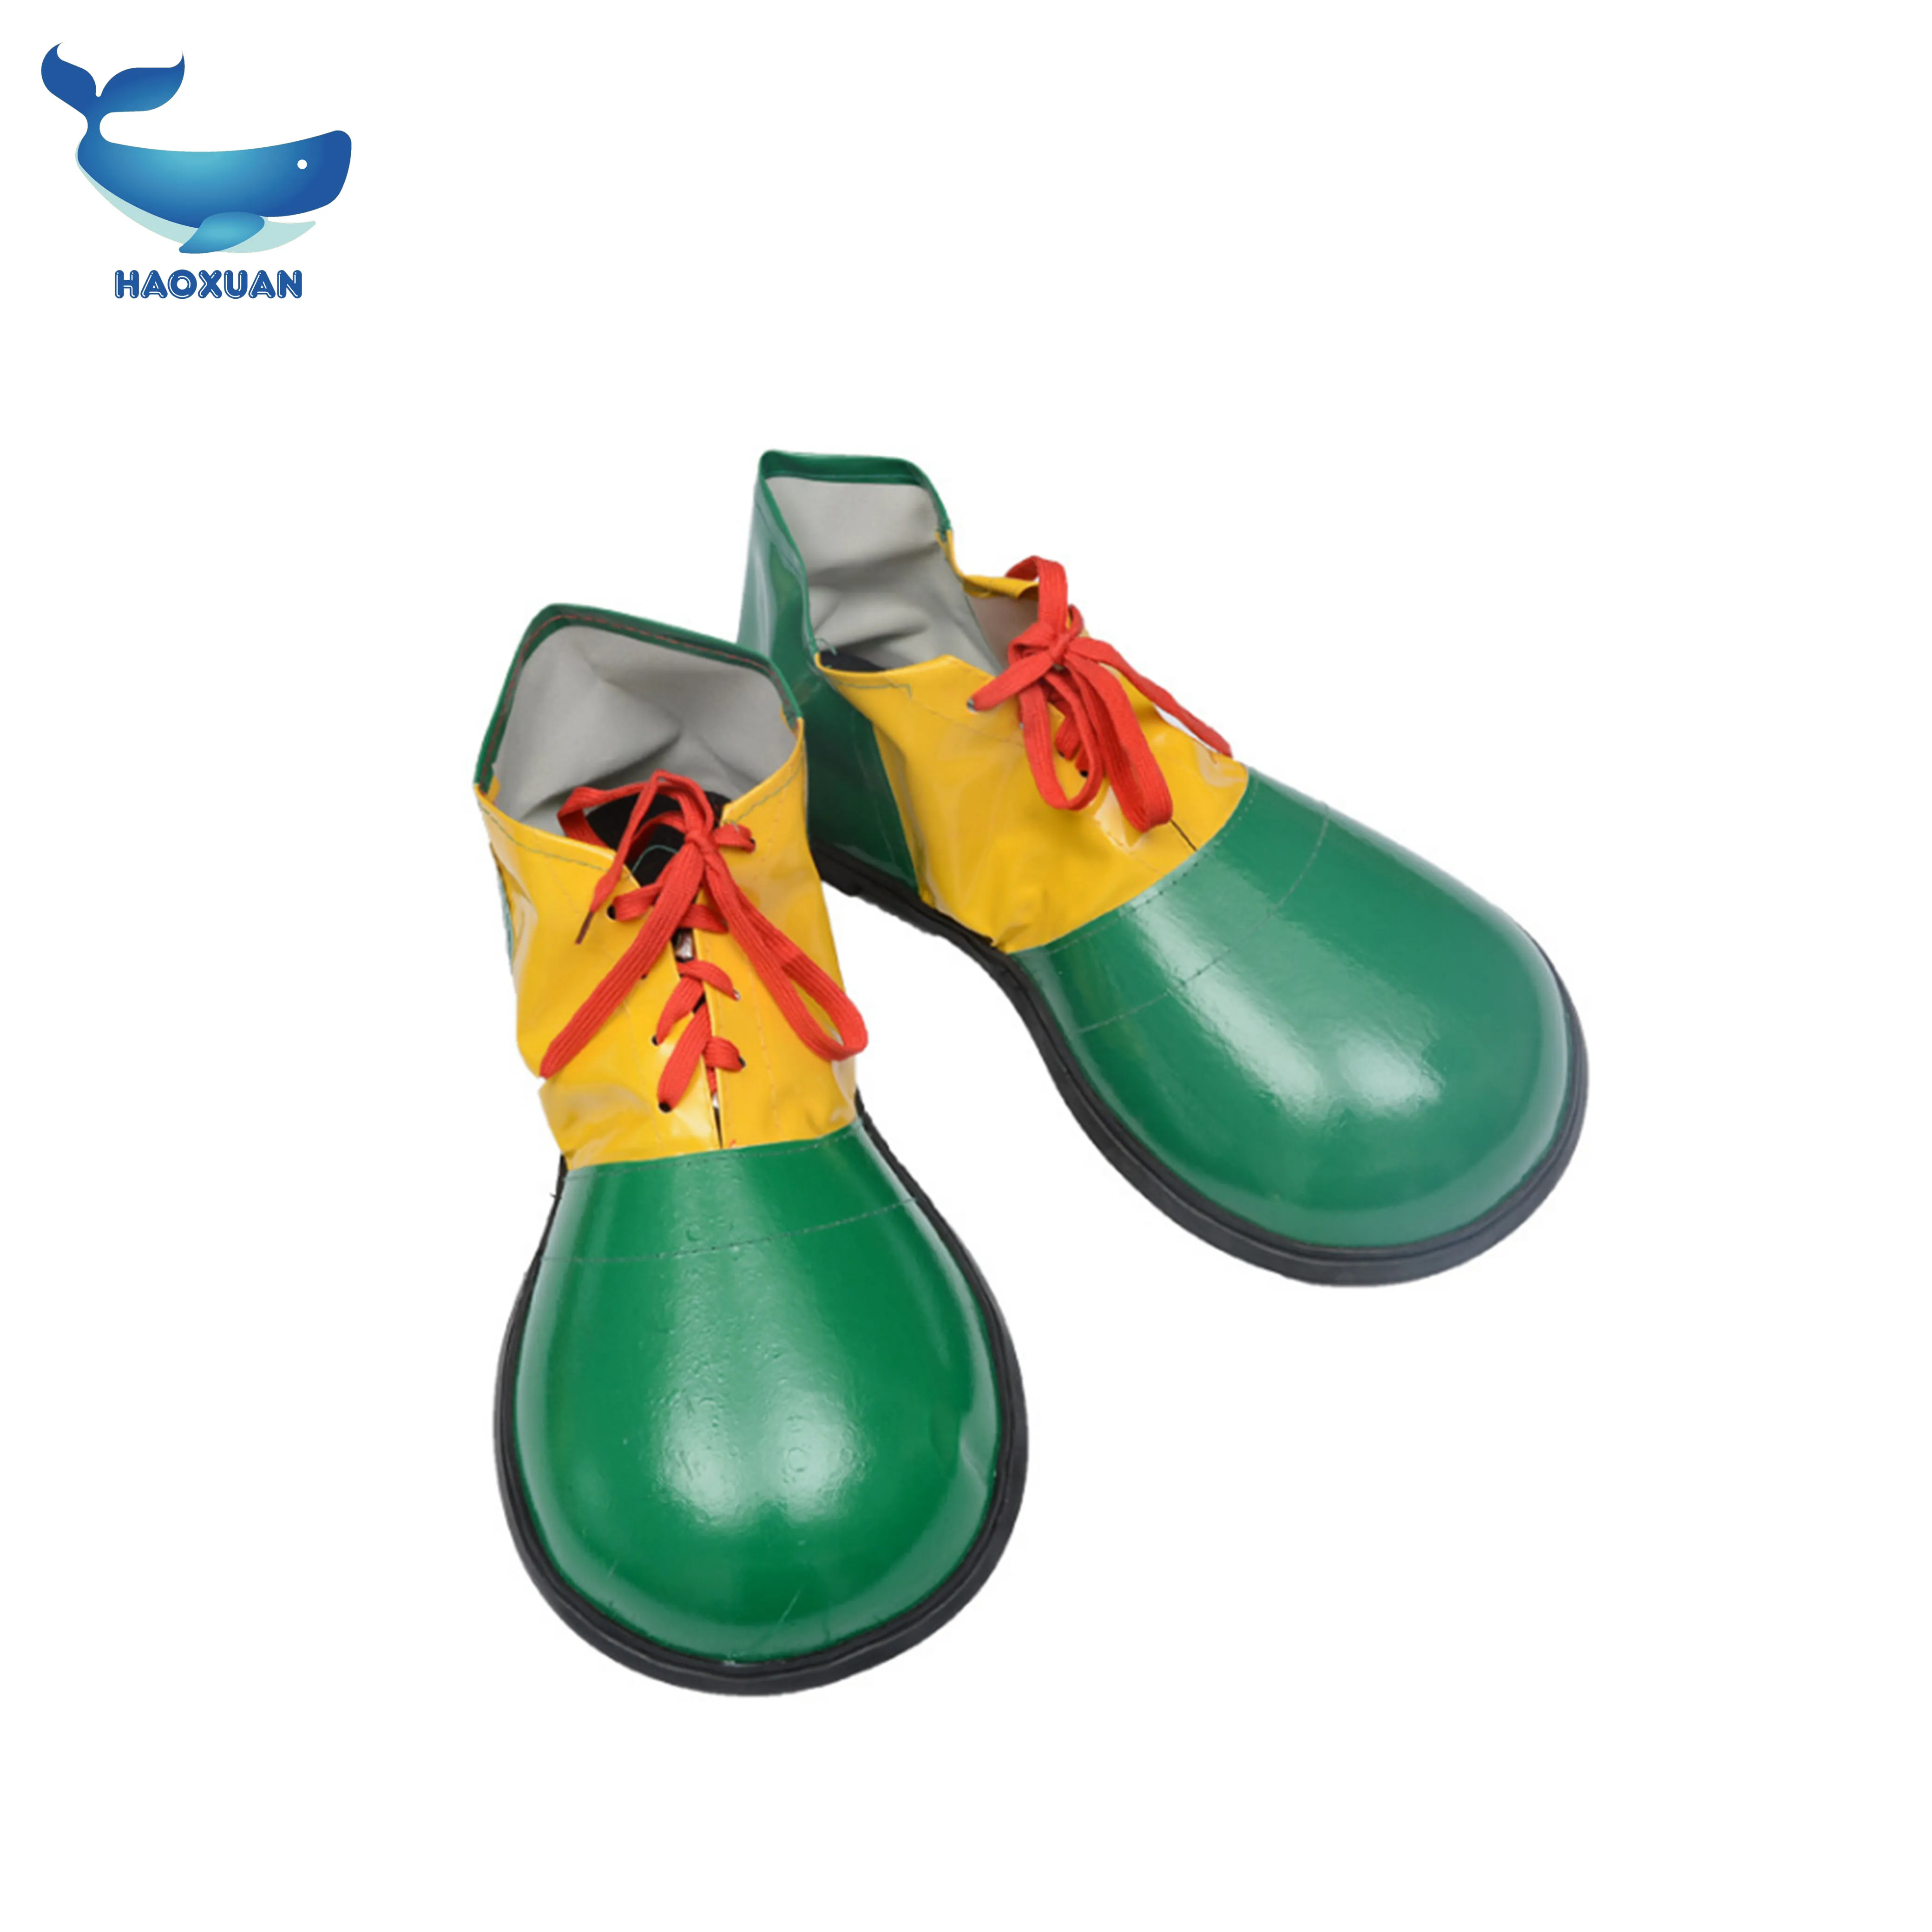 2018 Festival Performing Halloween Shoes Ornament Joker Happy Hallowmas  Shoes Halloween Costume Clown Shoes - Buy Halloween,Halloween Costume,Clown  Shoes Product on 